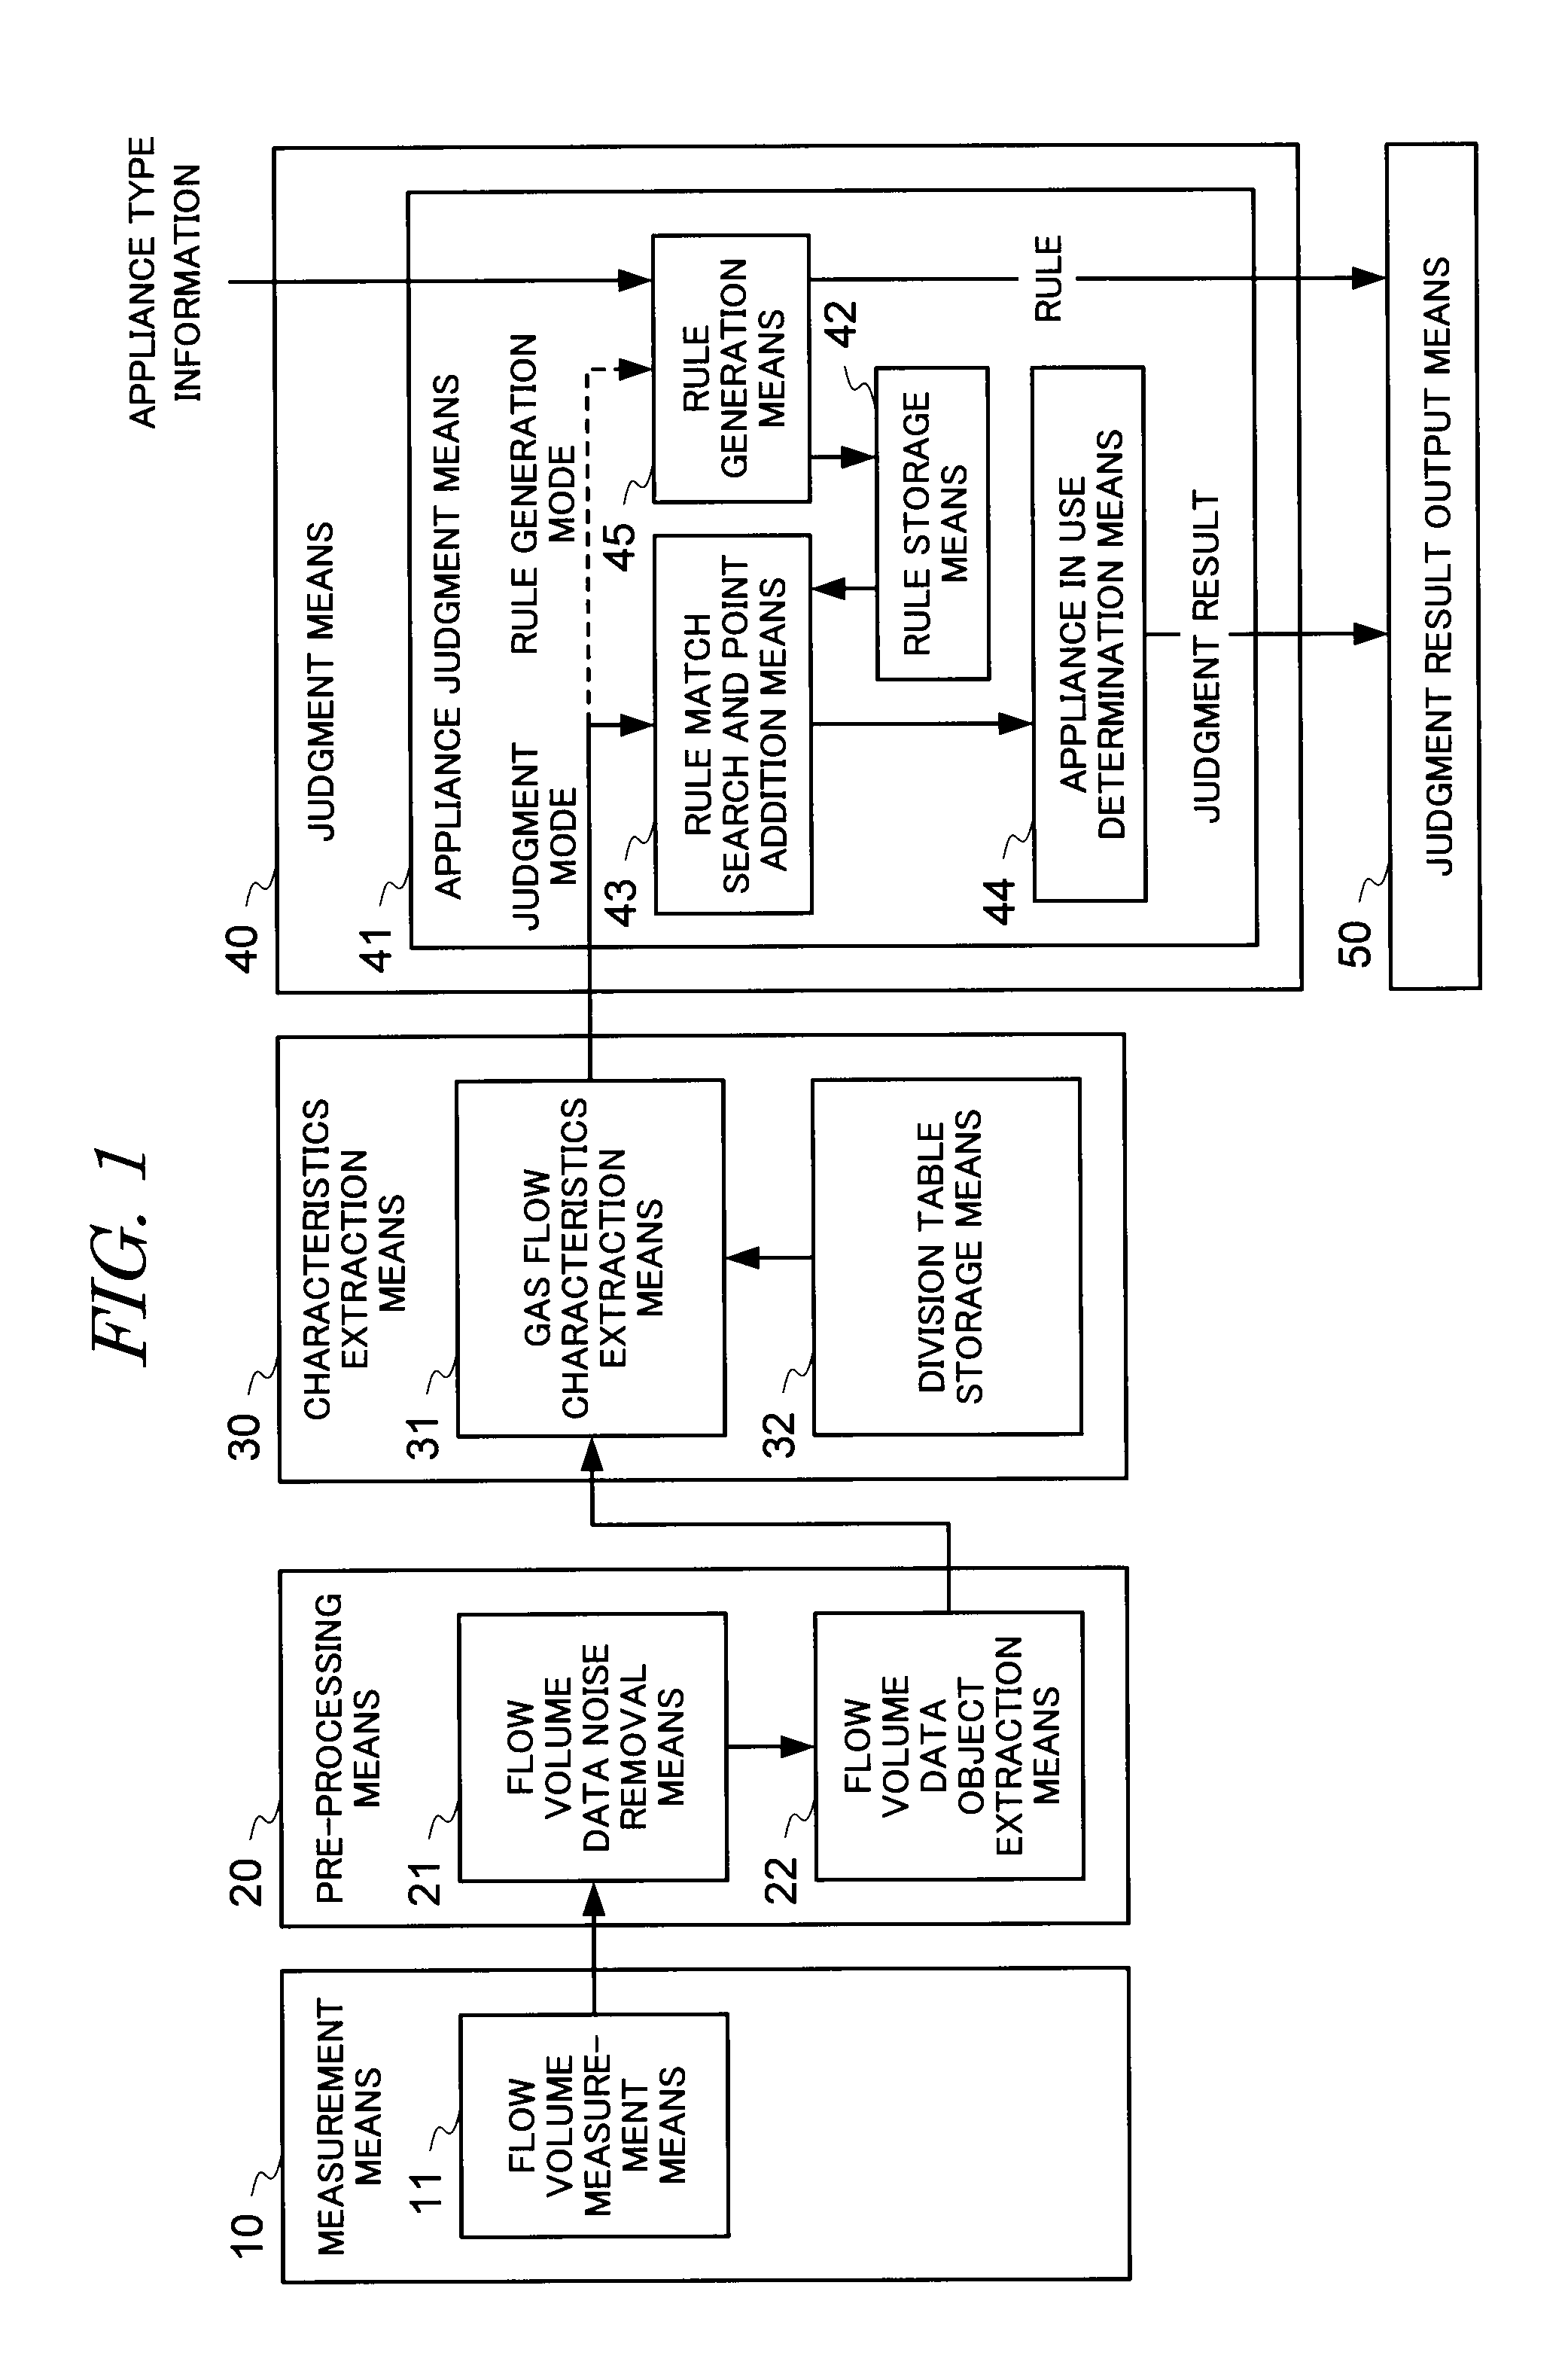 Gas appliance judgement apparatus and method